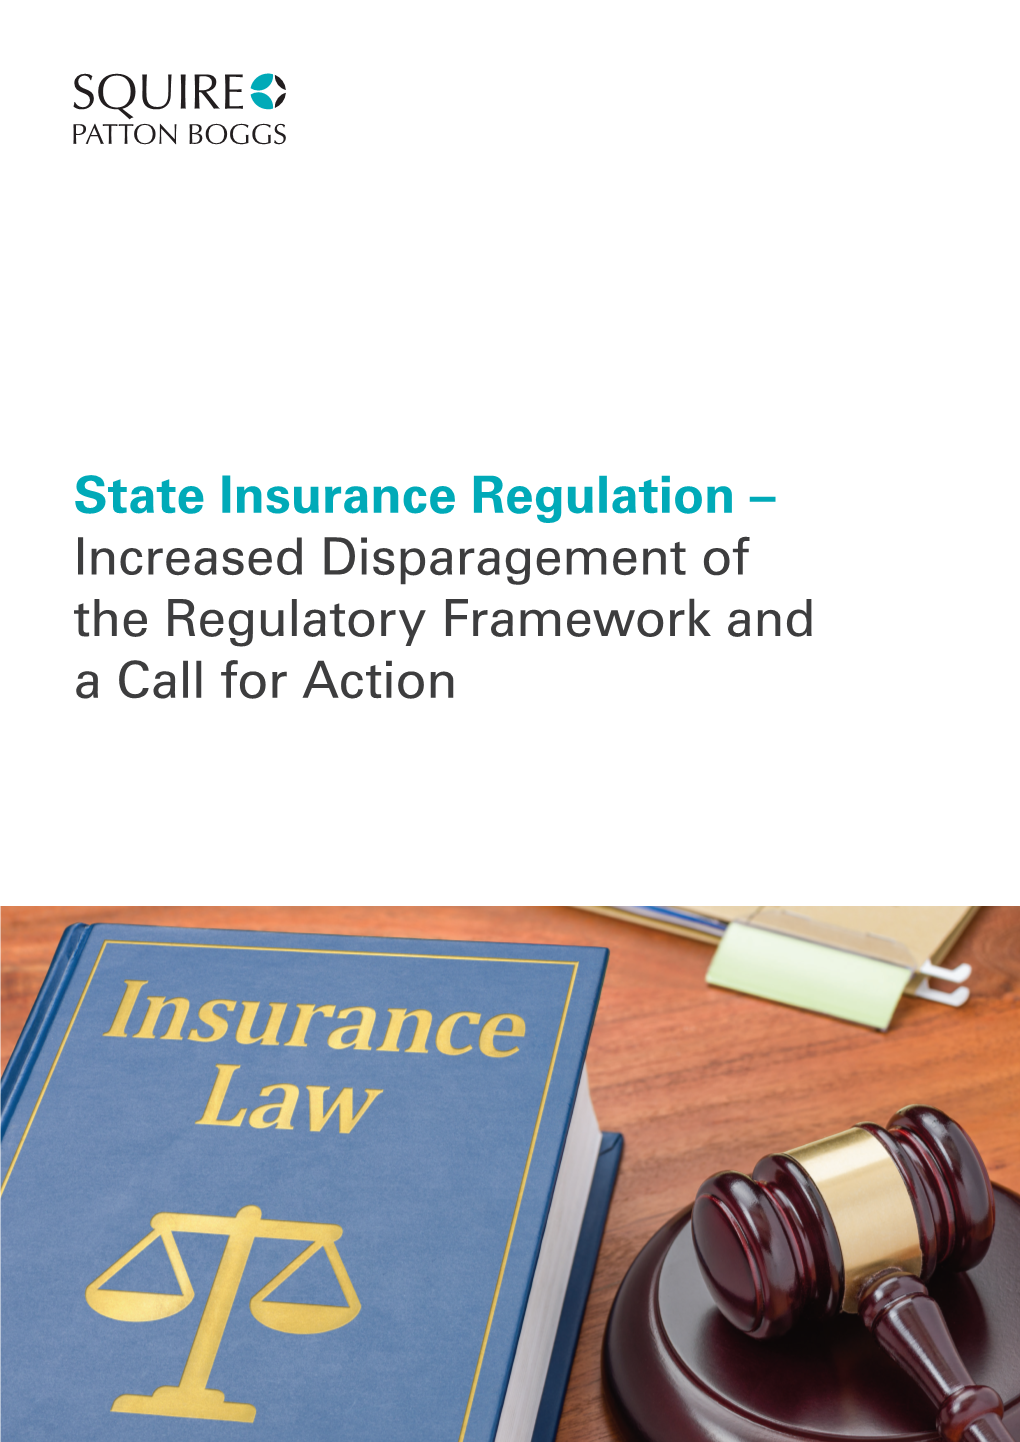 Increased Disparagement of the Regulatory Framework and a Call